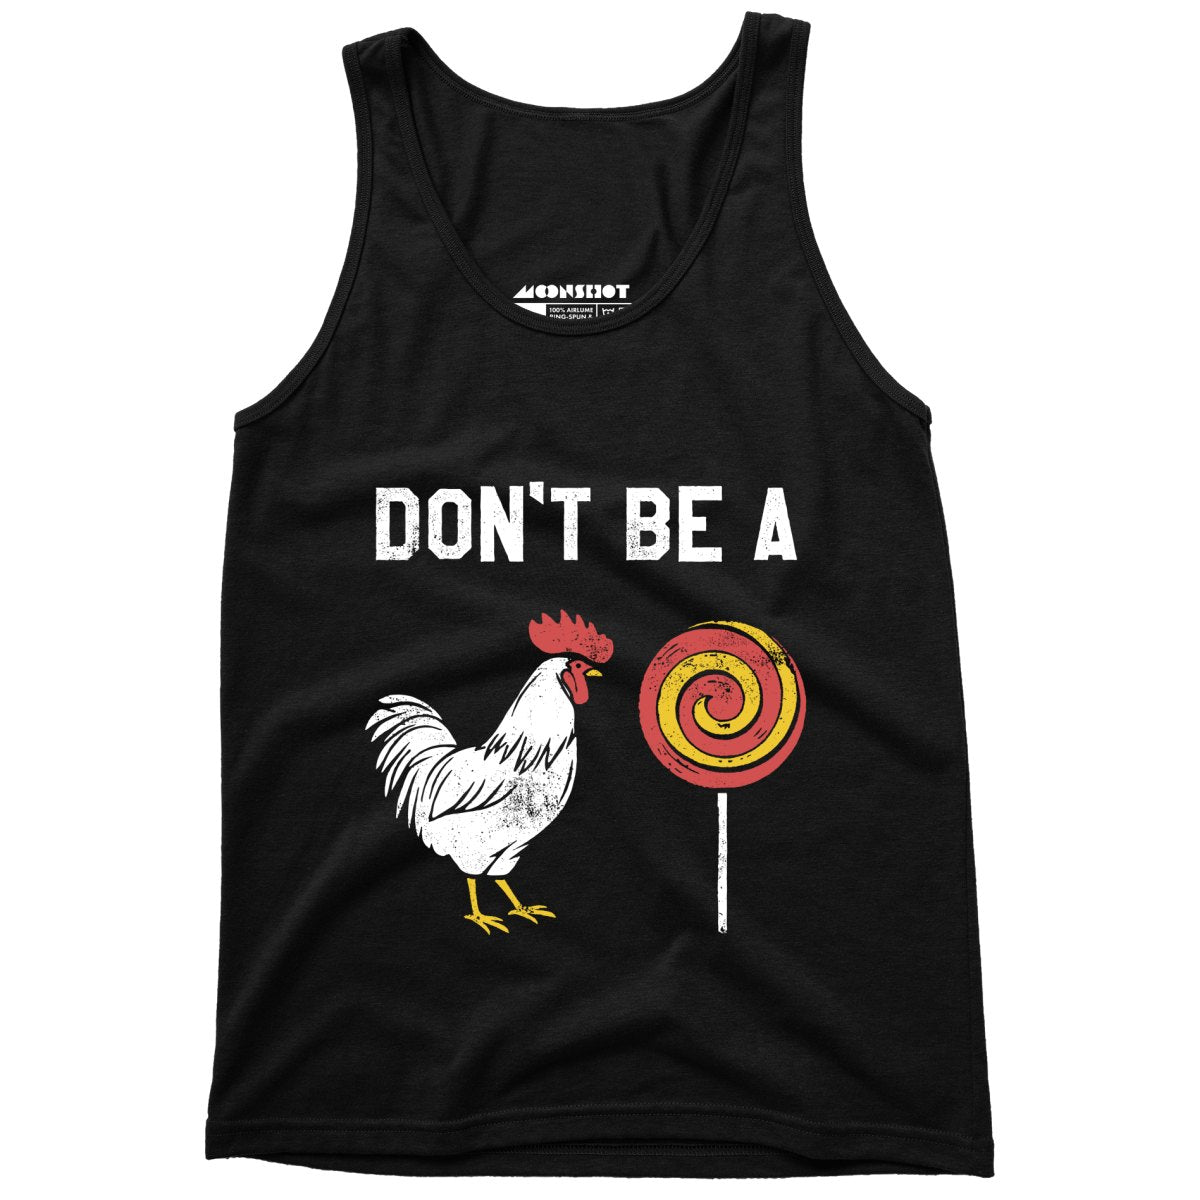 Don't Be a Cocksucker - Unisex Tank Top